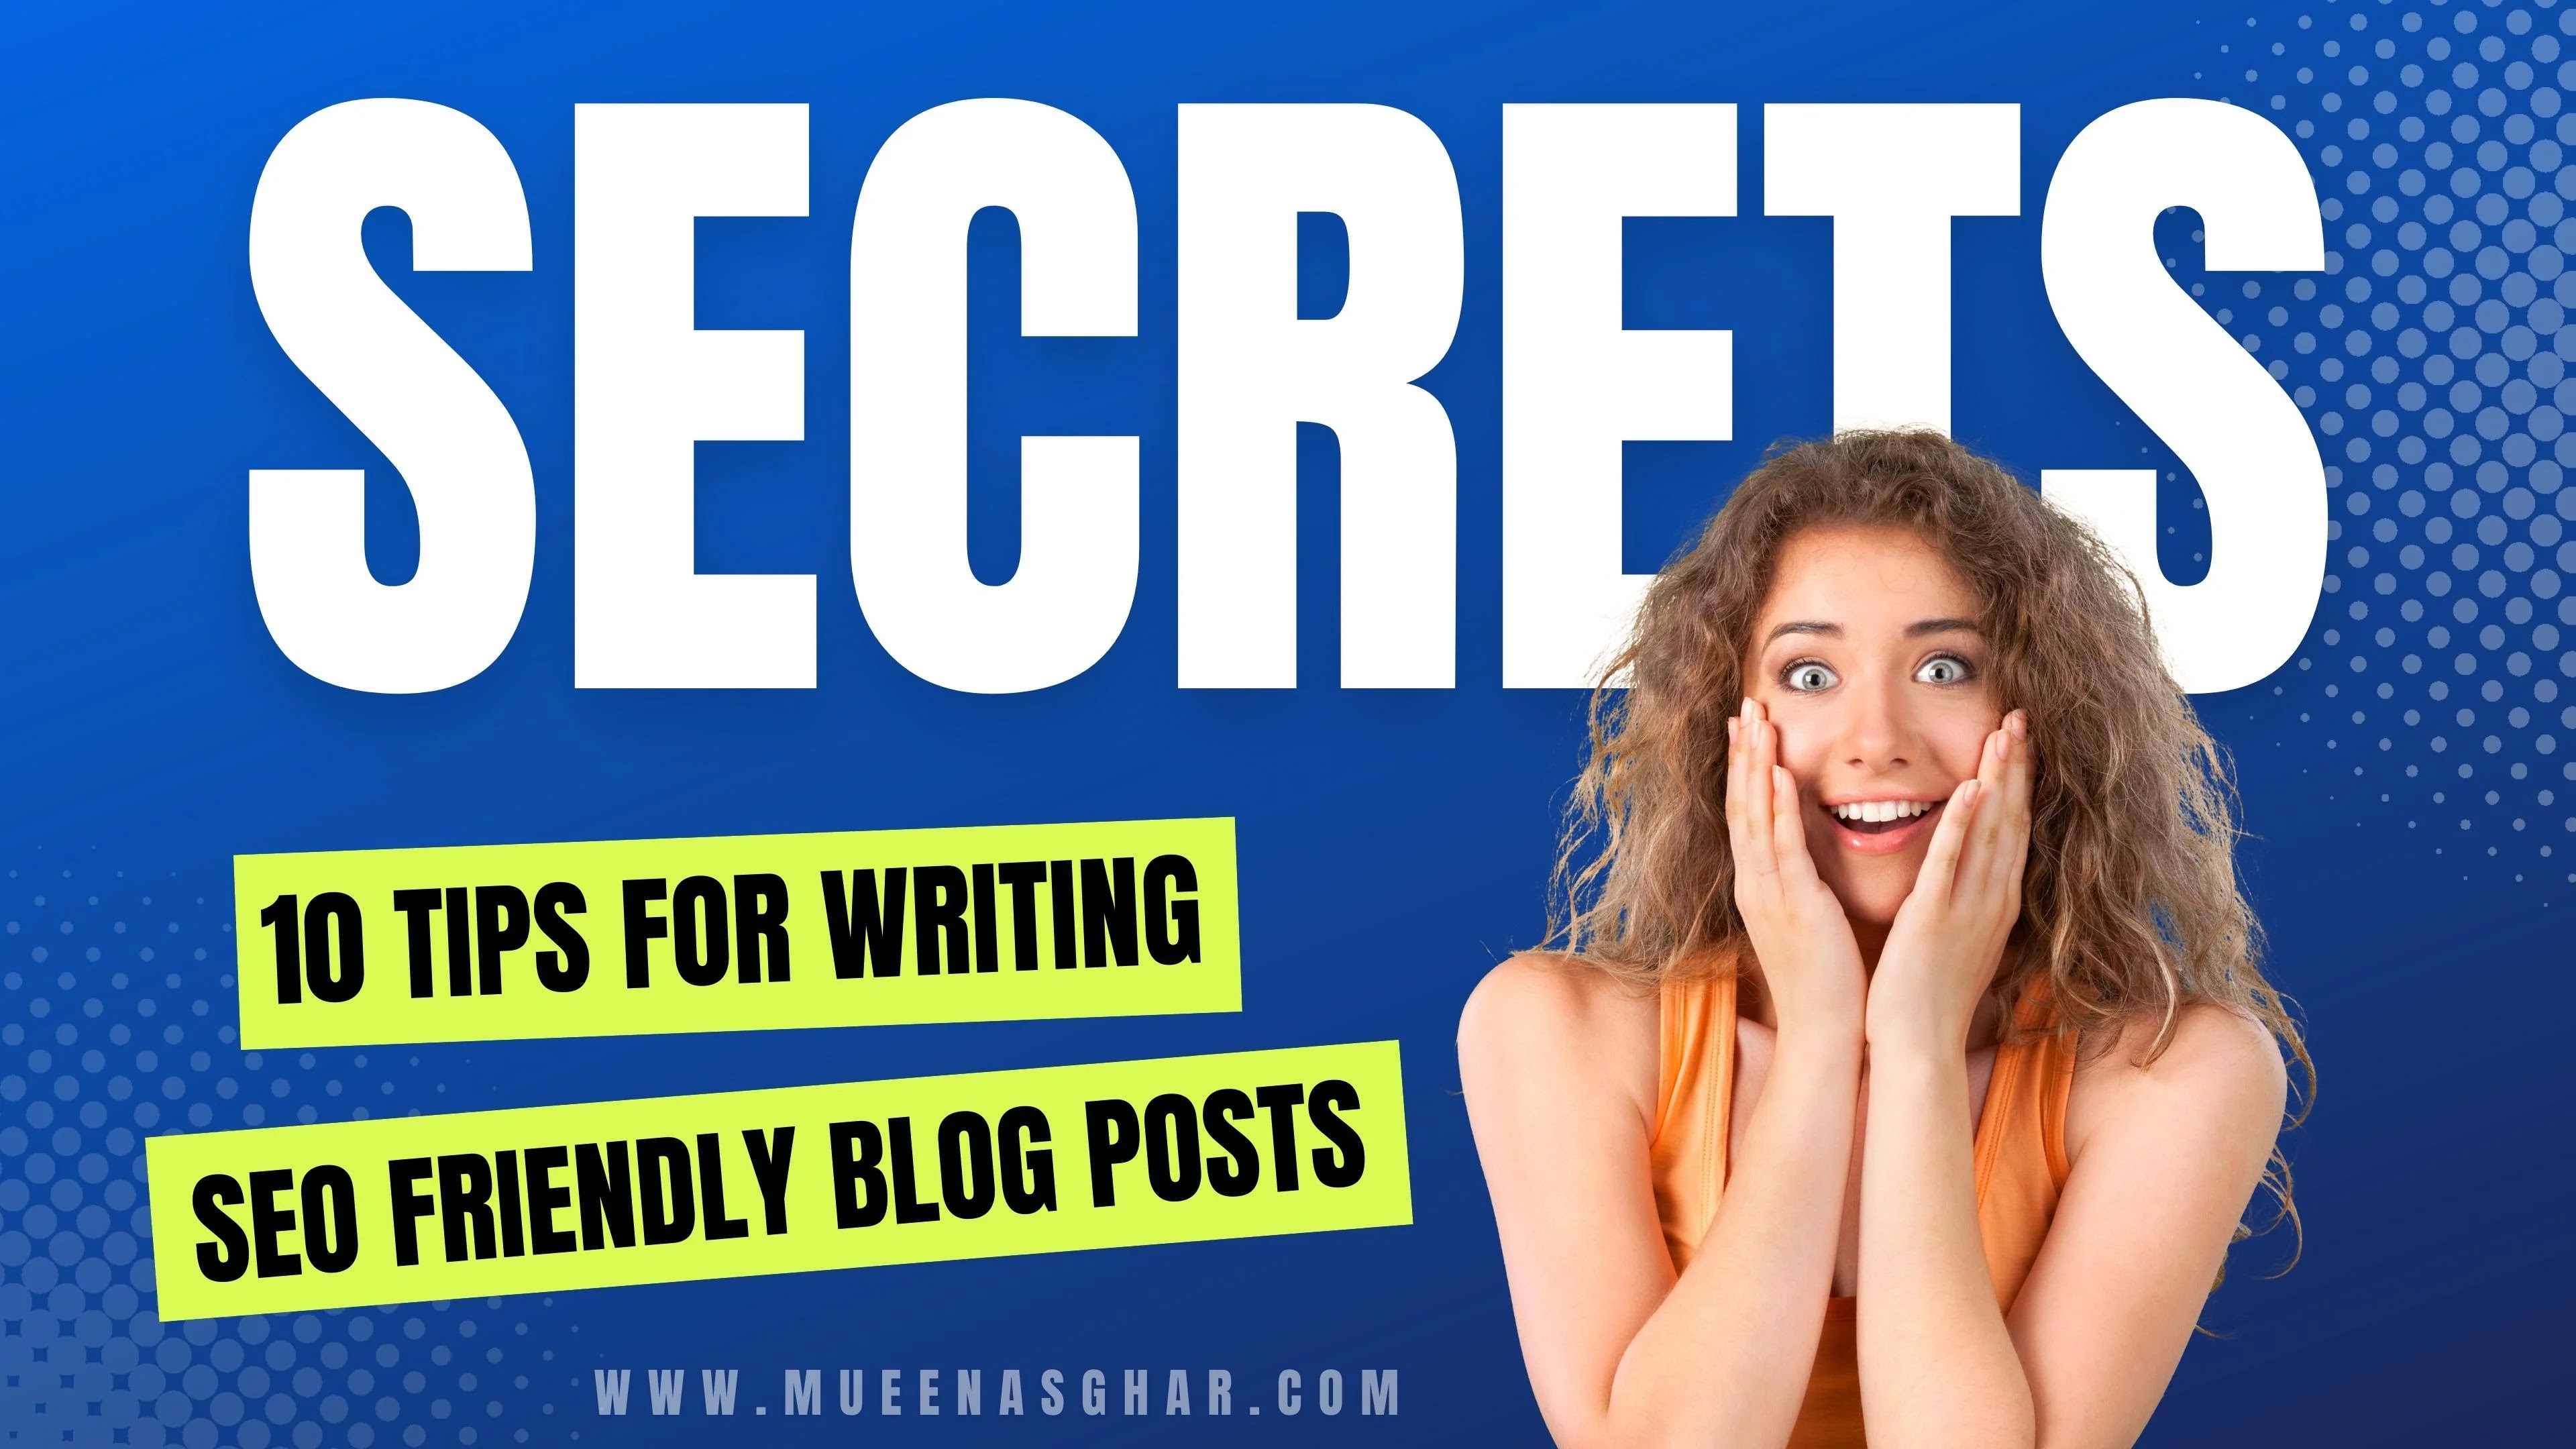 10 Tips for Writing SEO Friendly Blog Posts